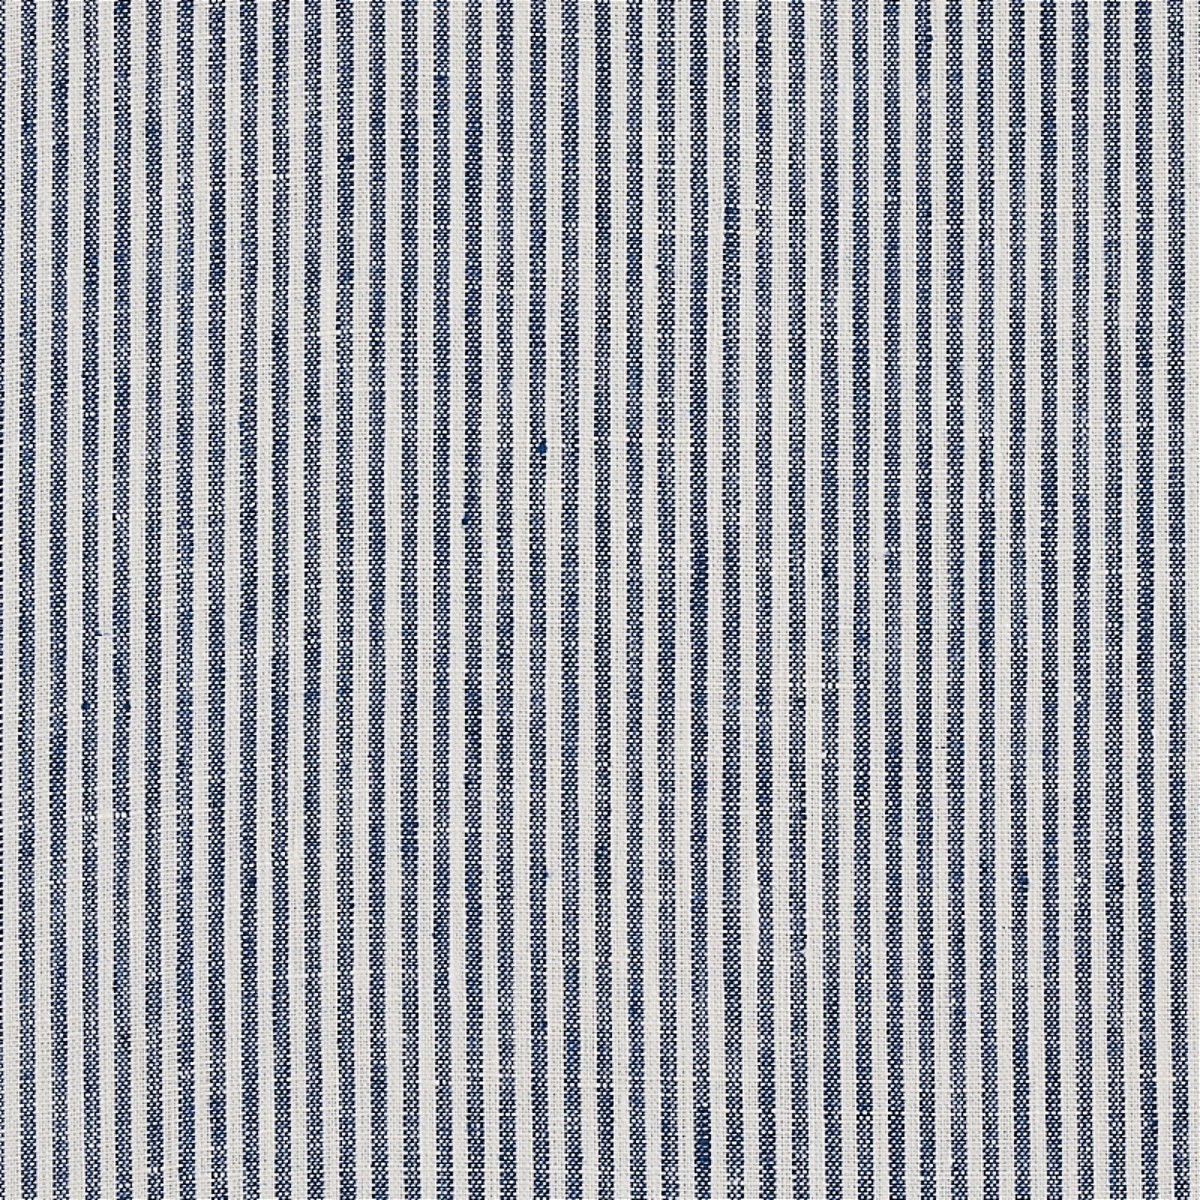 a blue and white striped fabric